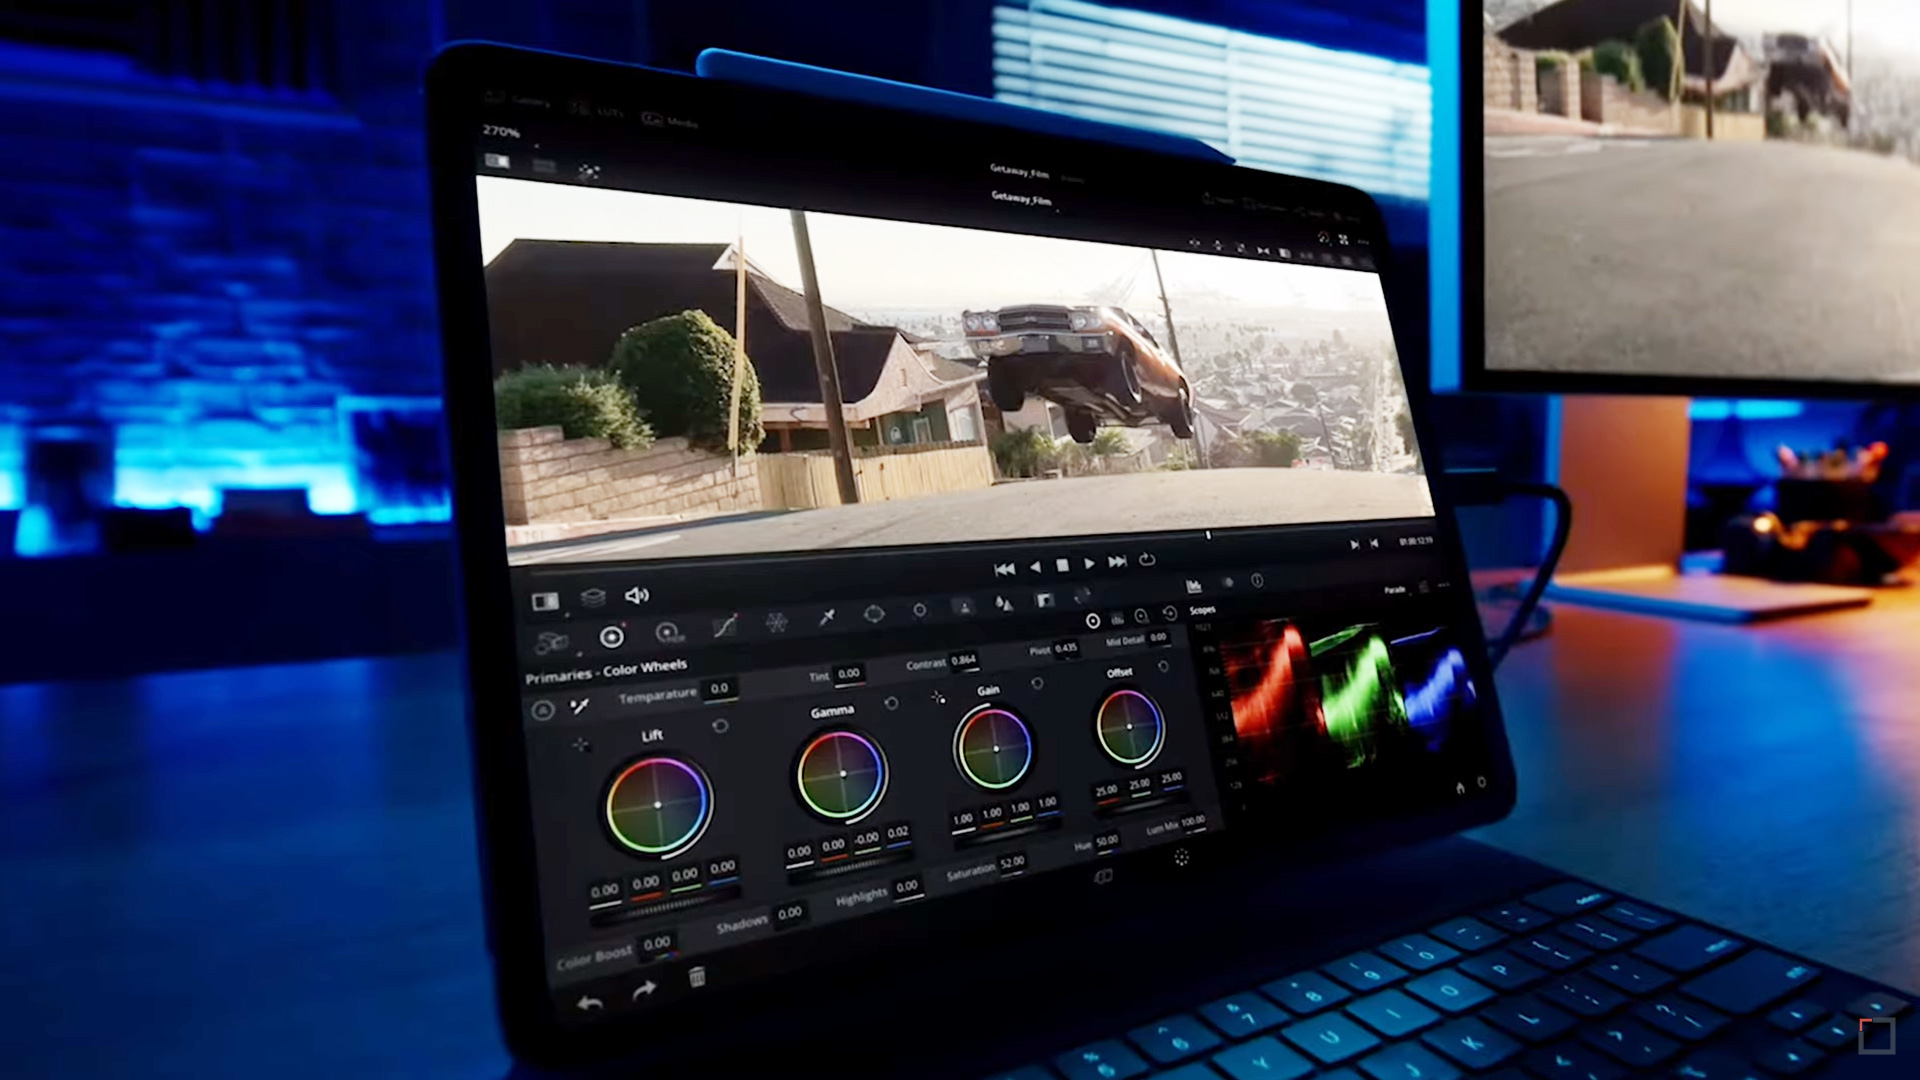 Davinci Resolve for iPad shown for the first time